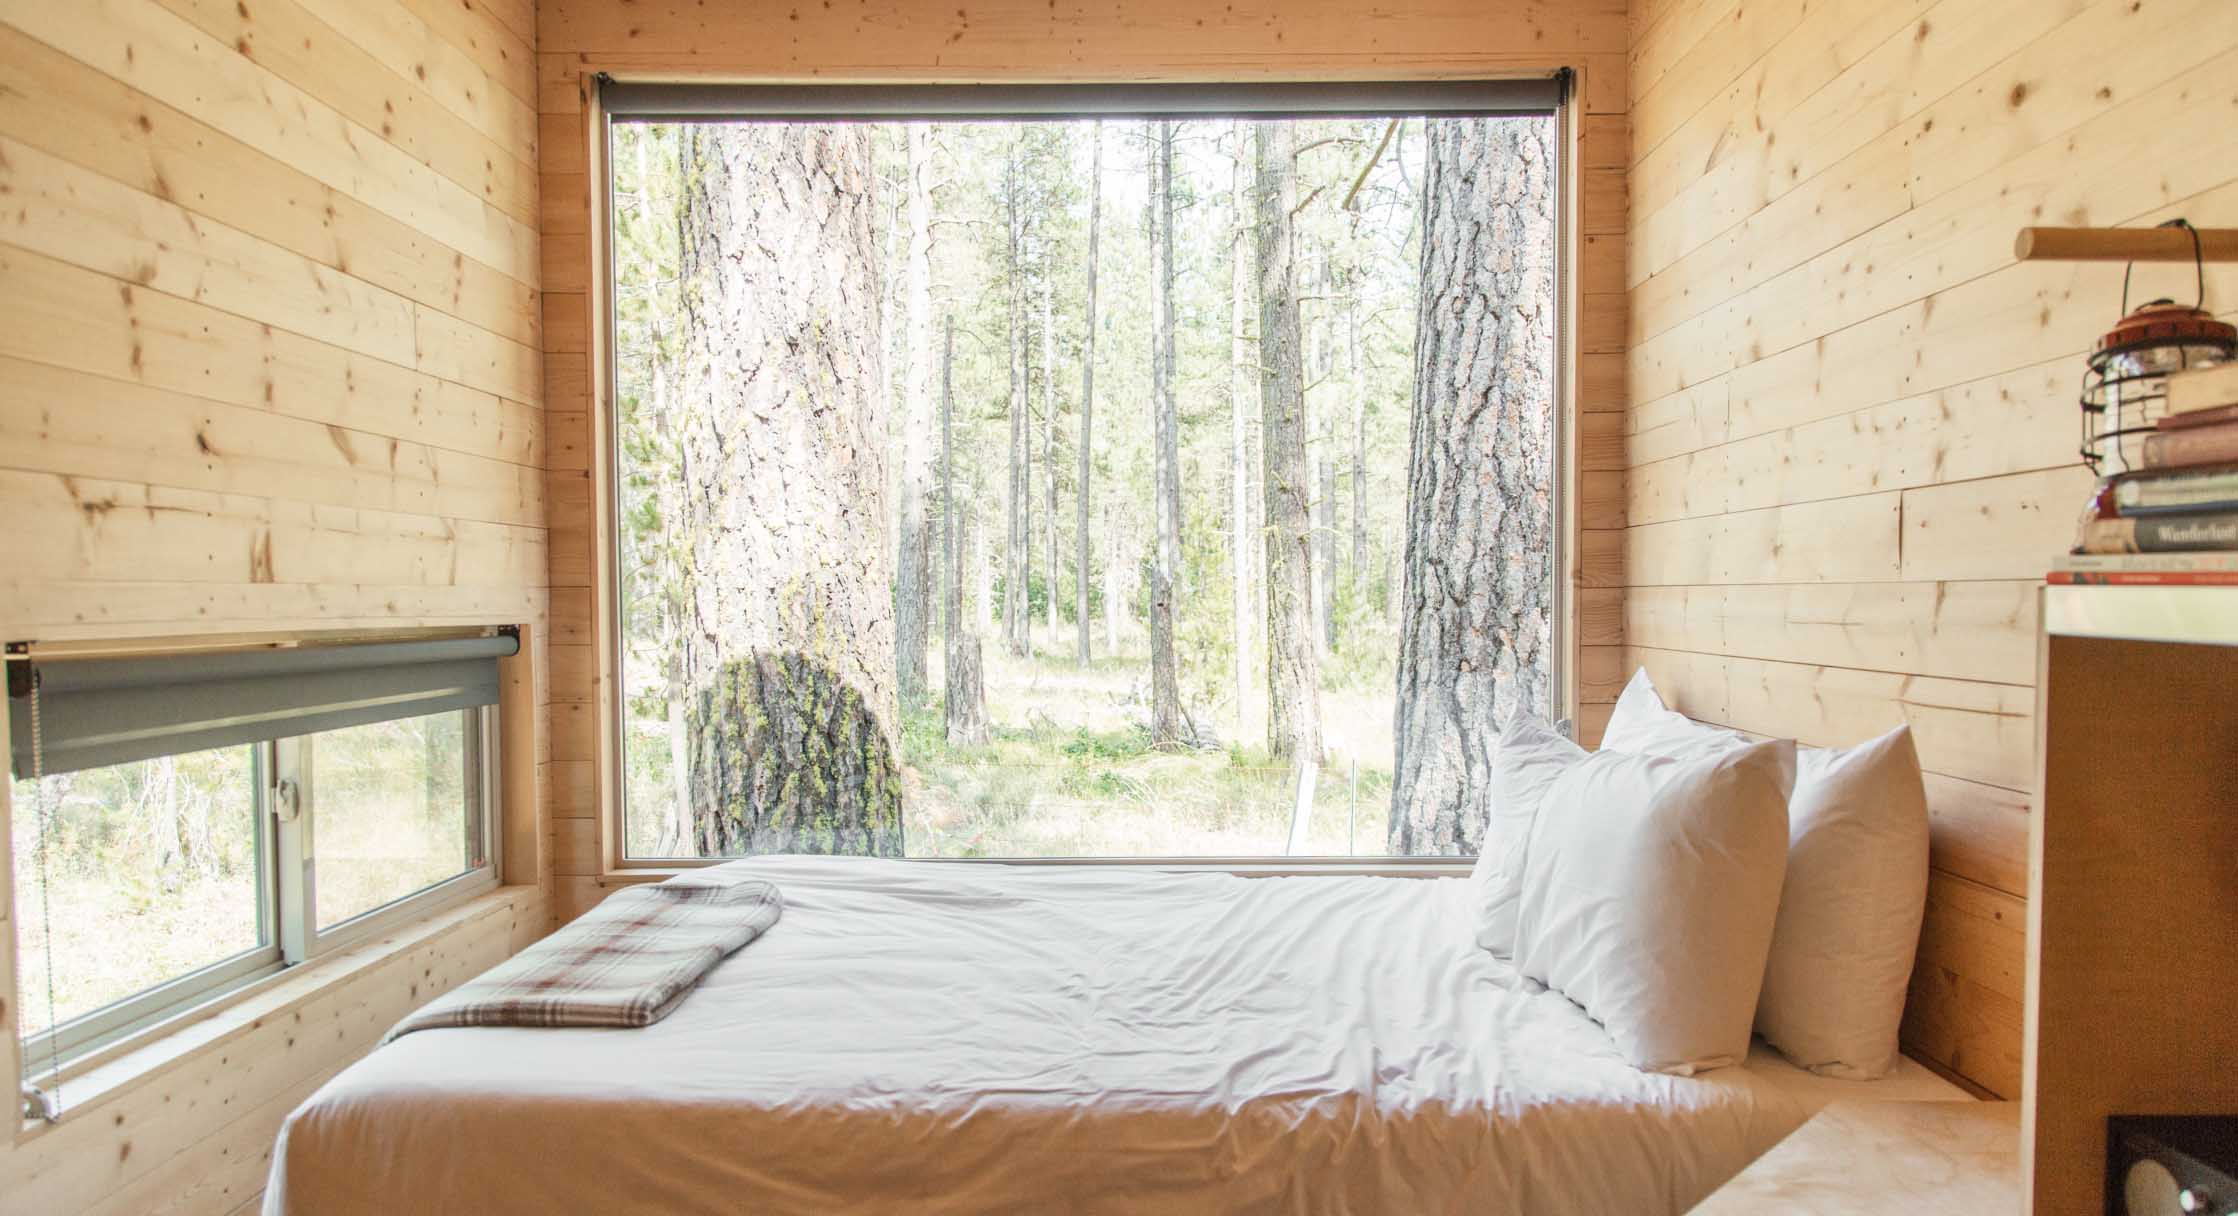 A view from inside a Getaway Tiny Cabin